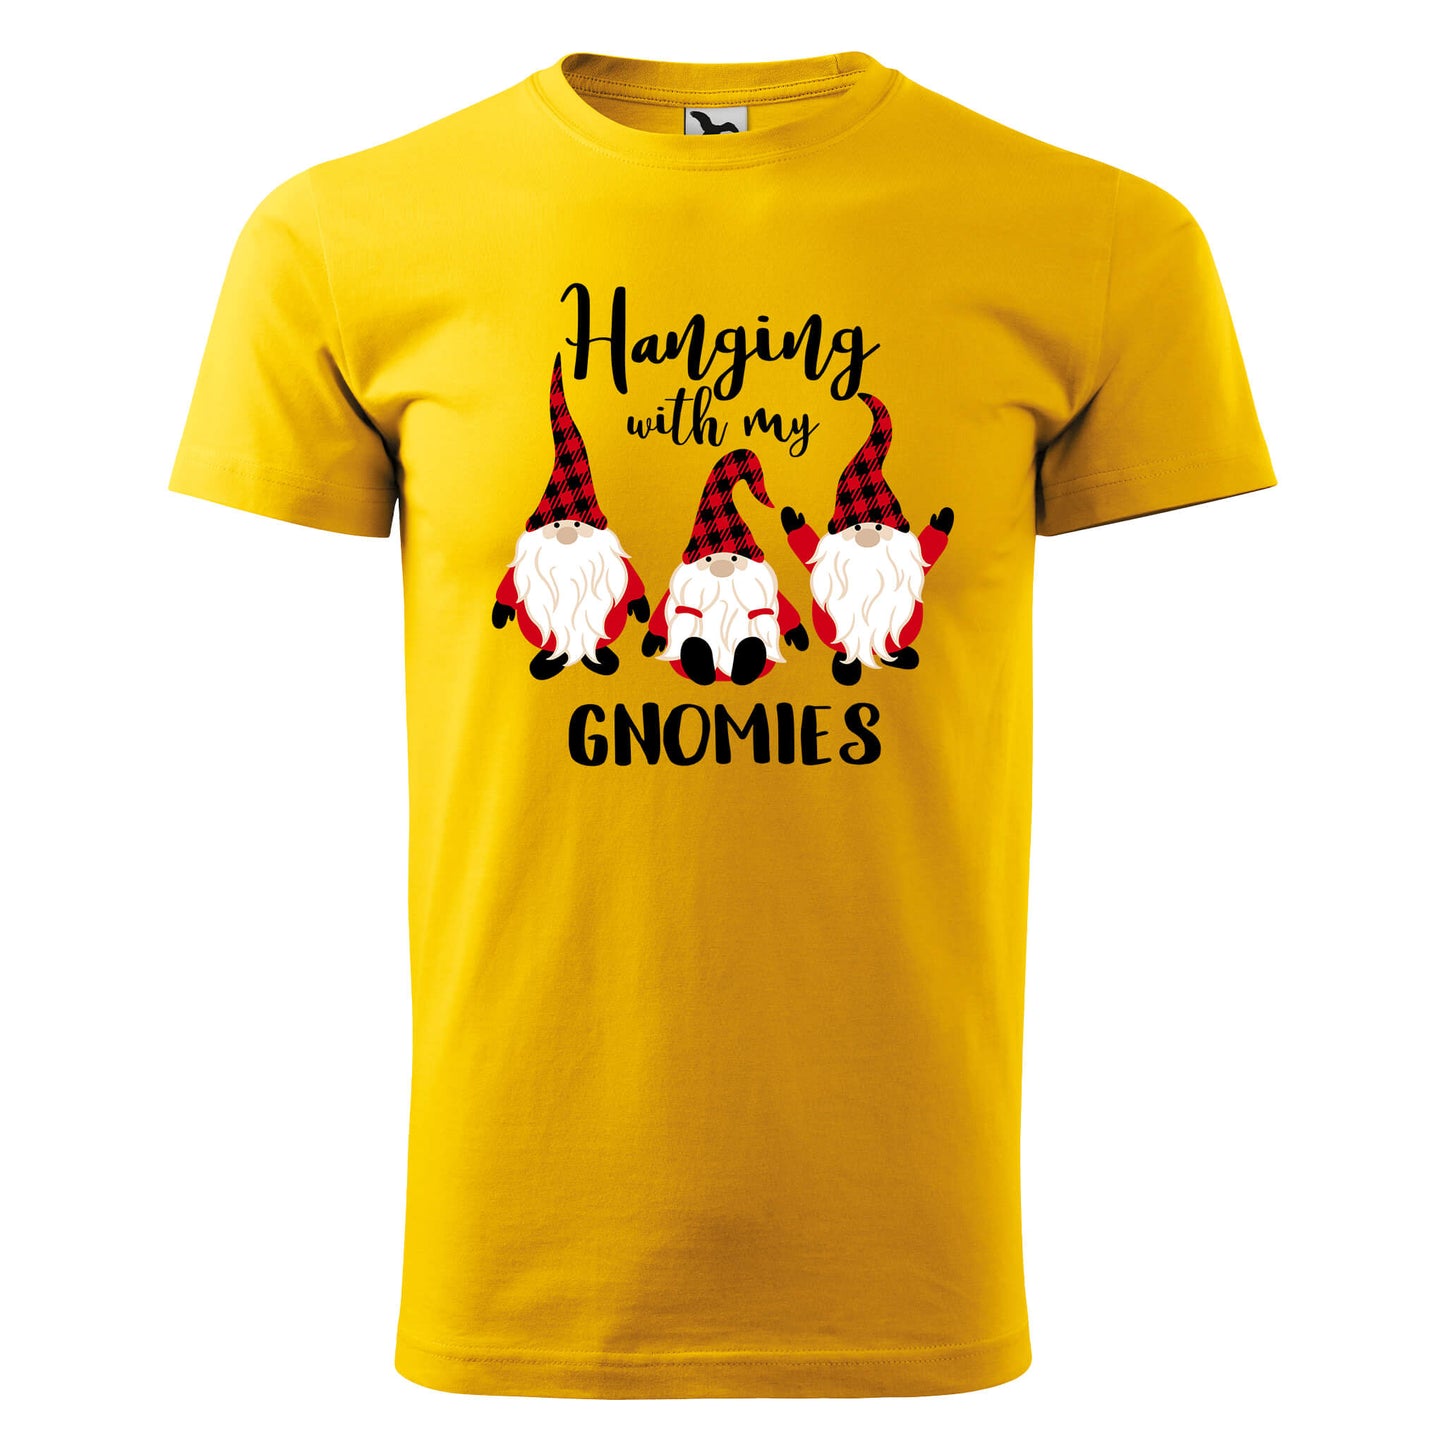 Hanging with my gnomies t-shirt - rvdesignprint